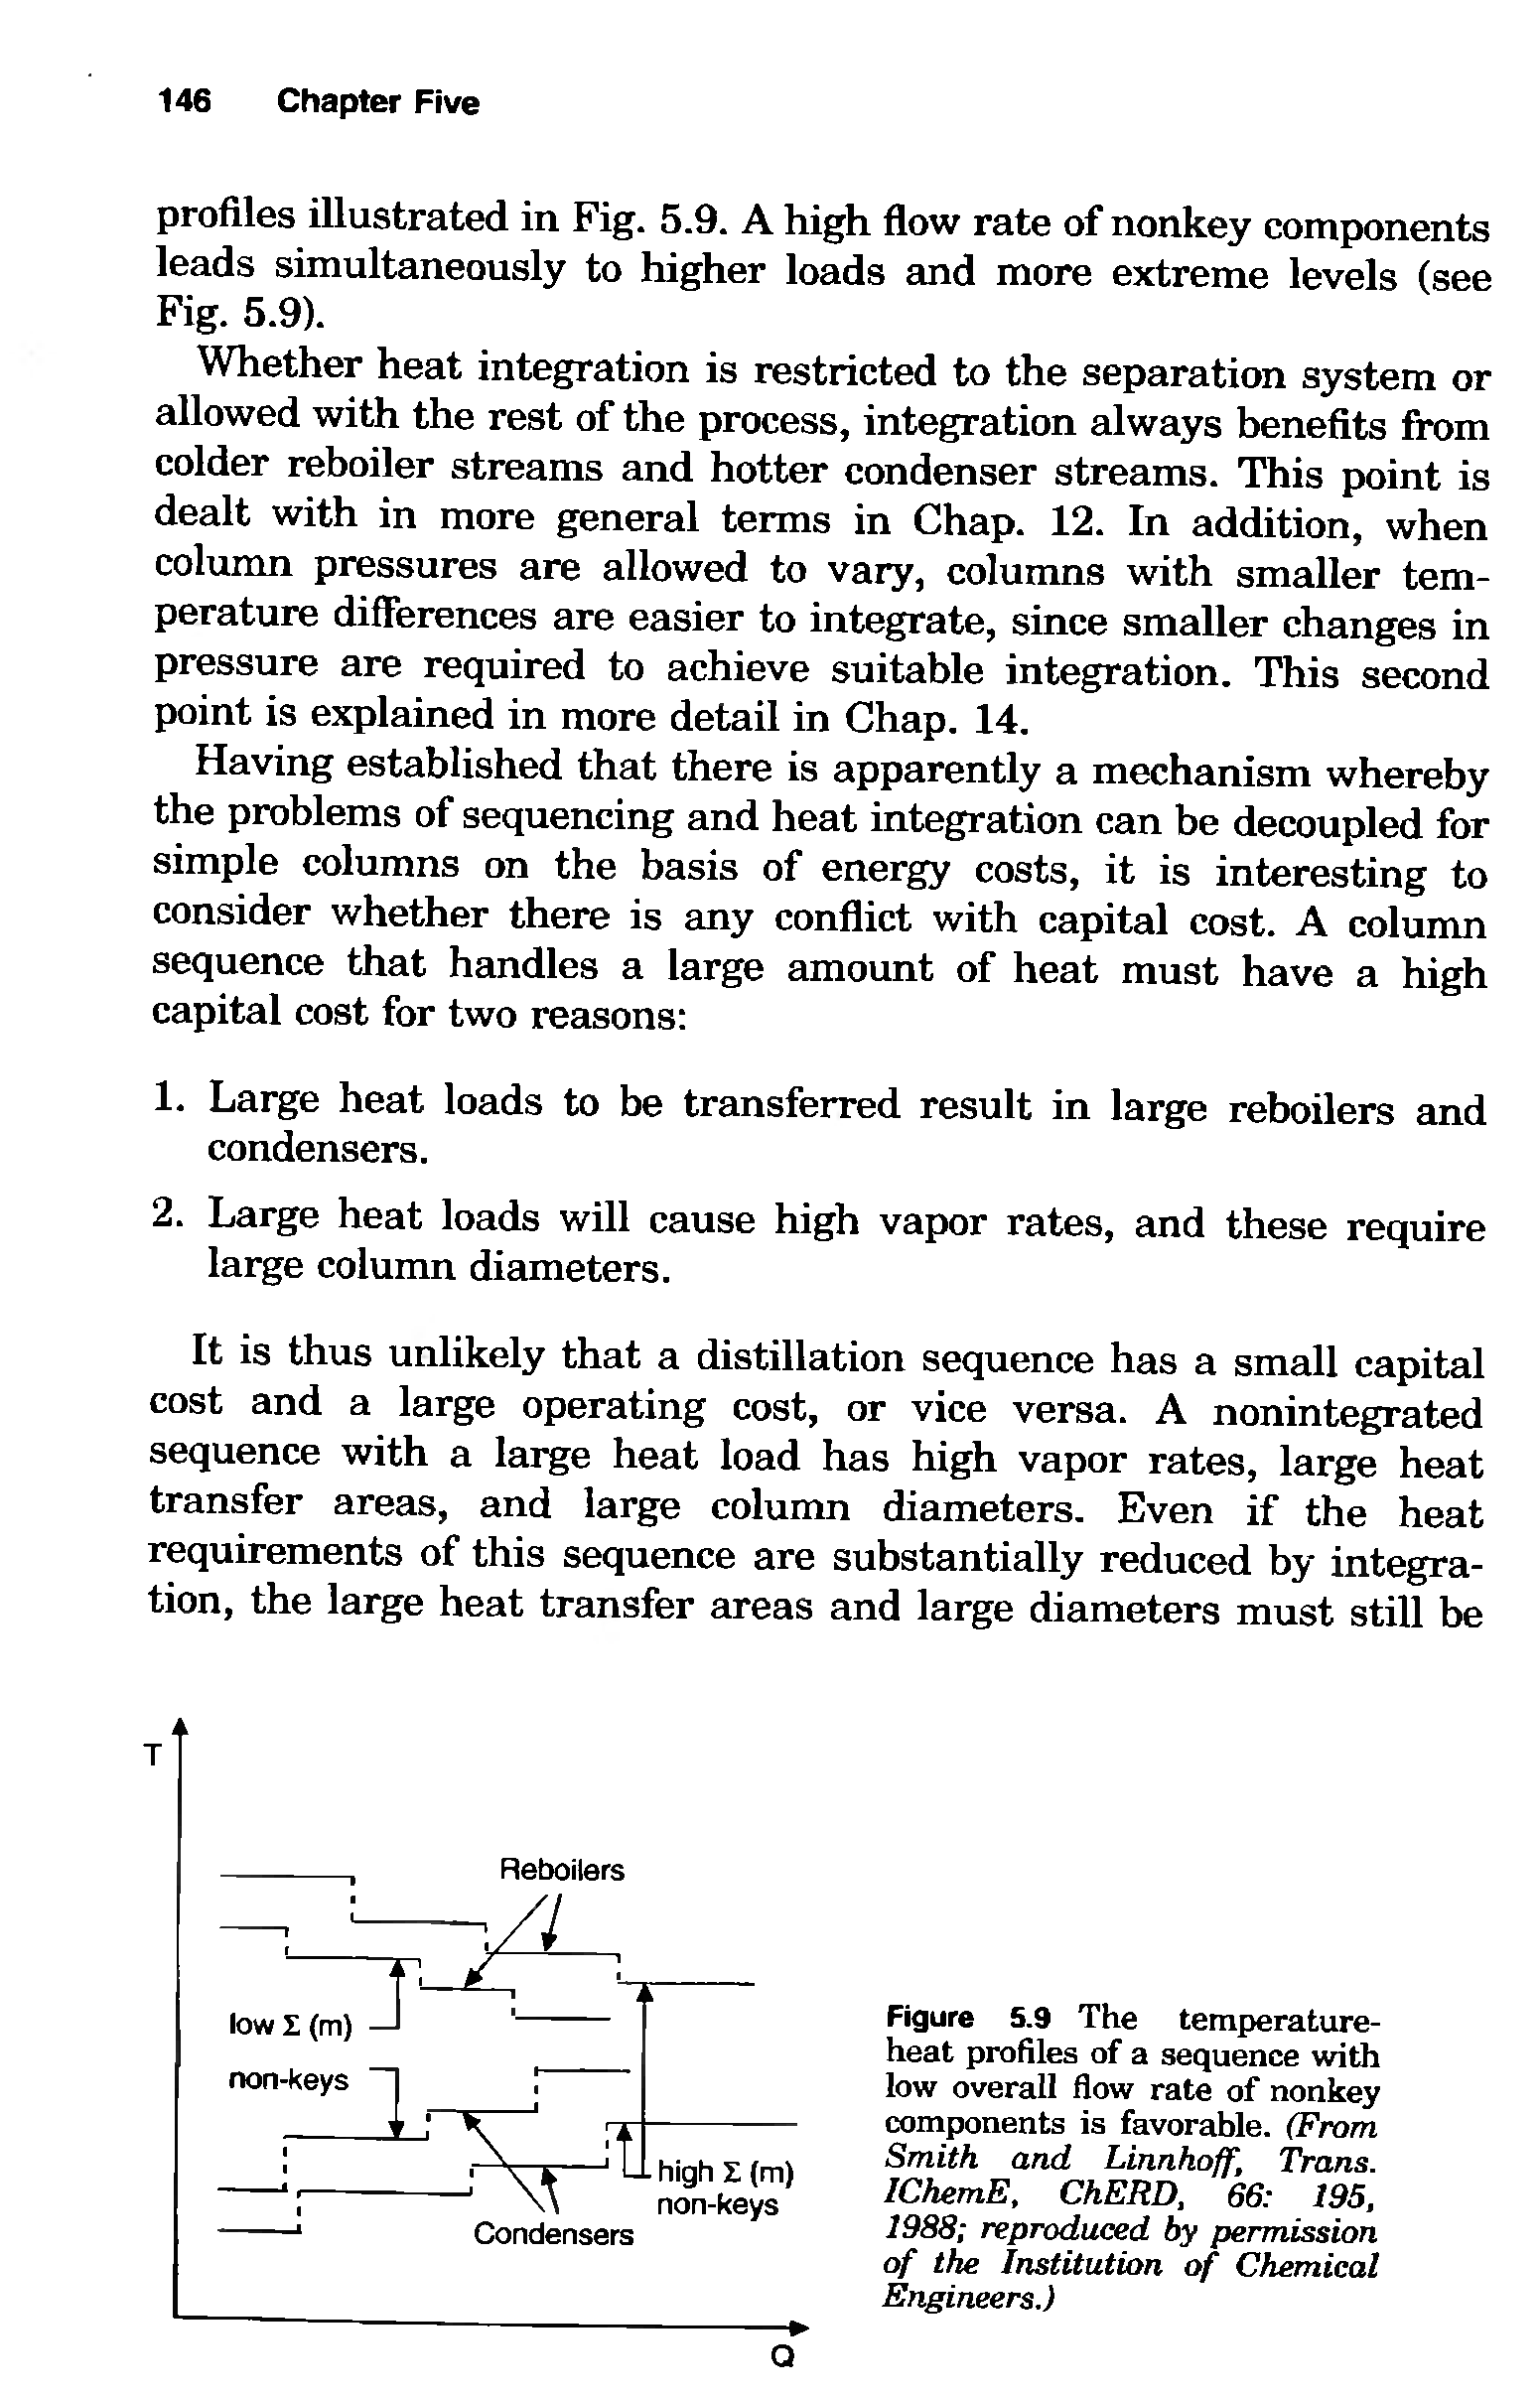 Figure 5.9 The temperature-heat profiles of a sequence with low overall flow rate of nonkey components is favorable. (From Smith and Linnhoff, Trans. IChemE, ChERD, 66 195. 1988 reproduced by permission of the Institution of Chemical Engineers.)...